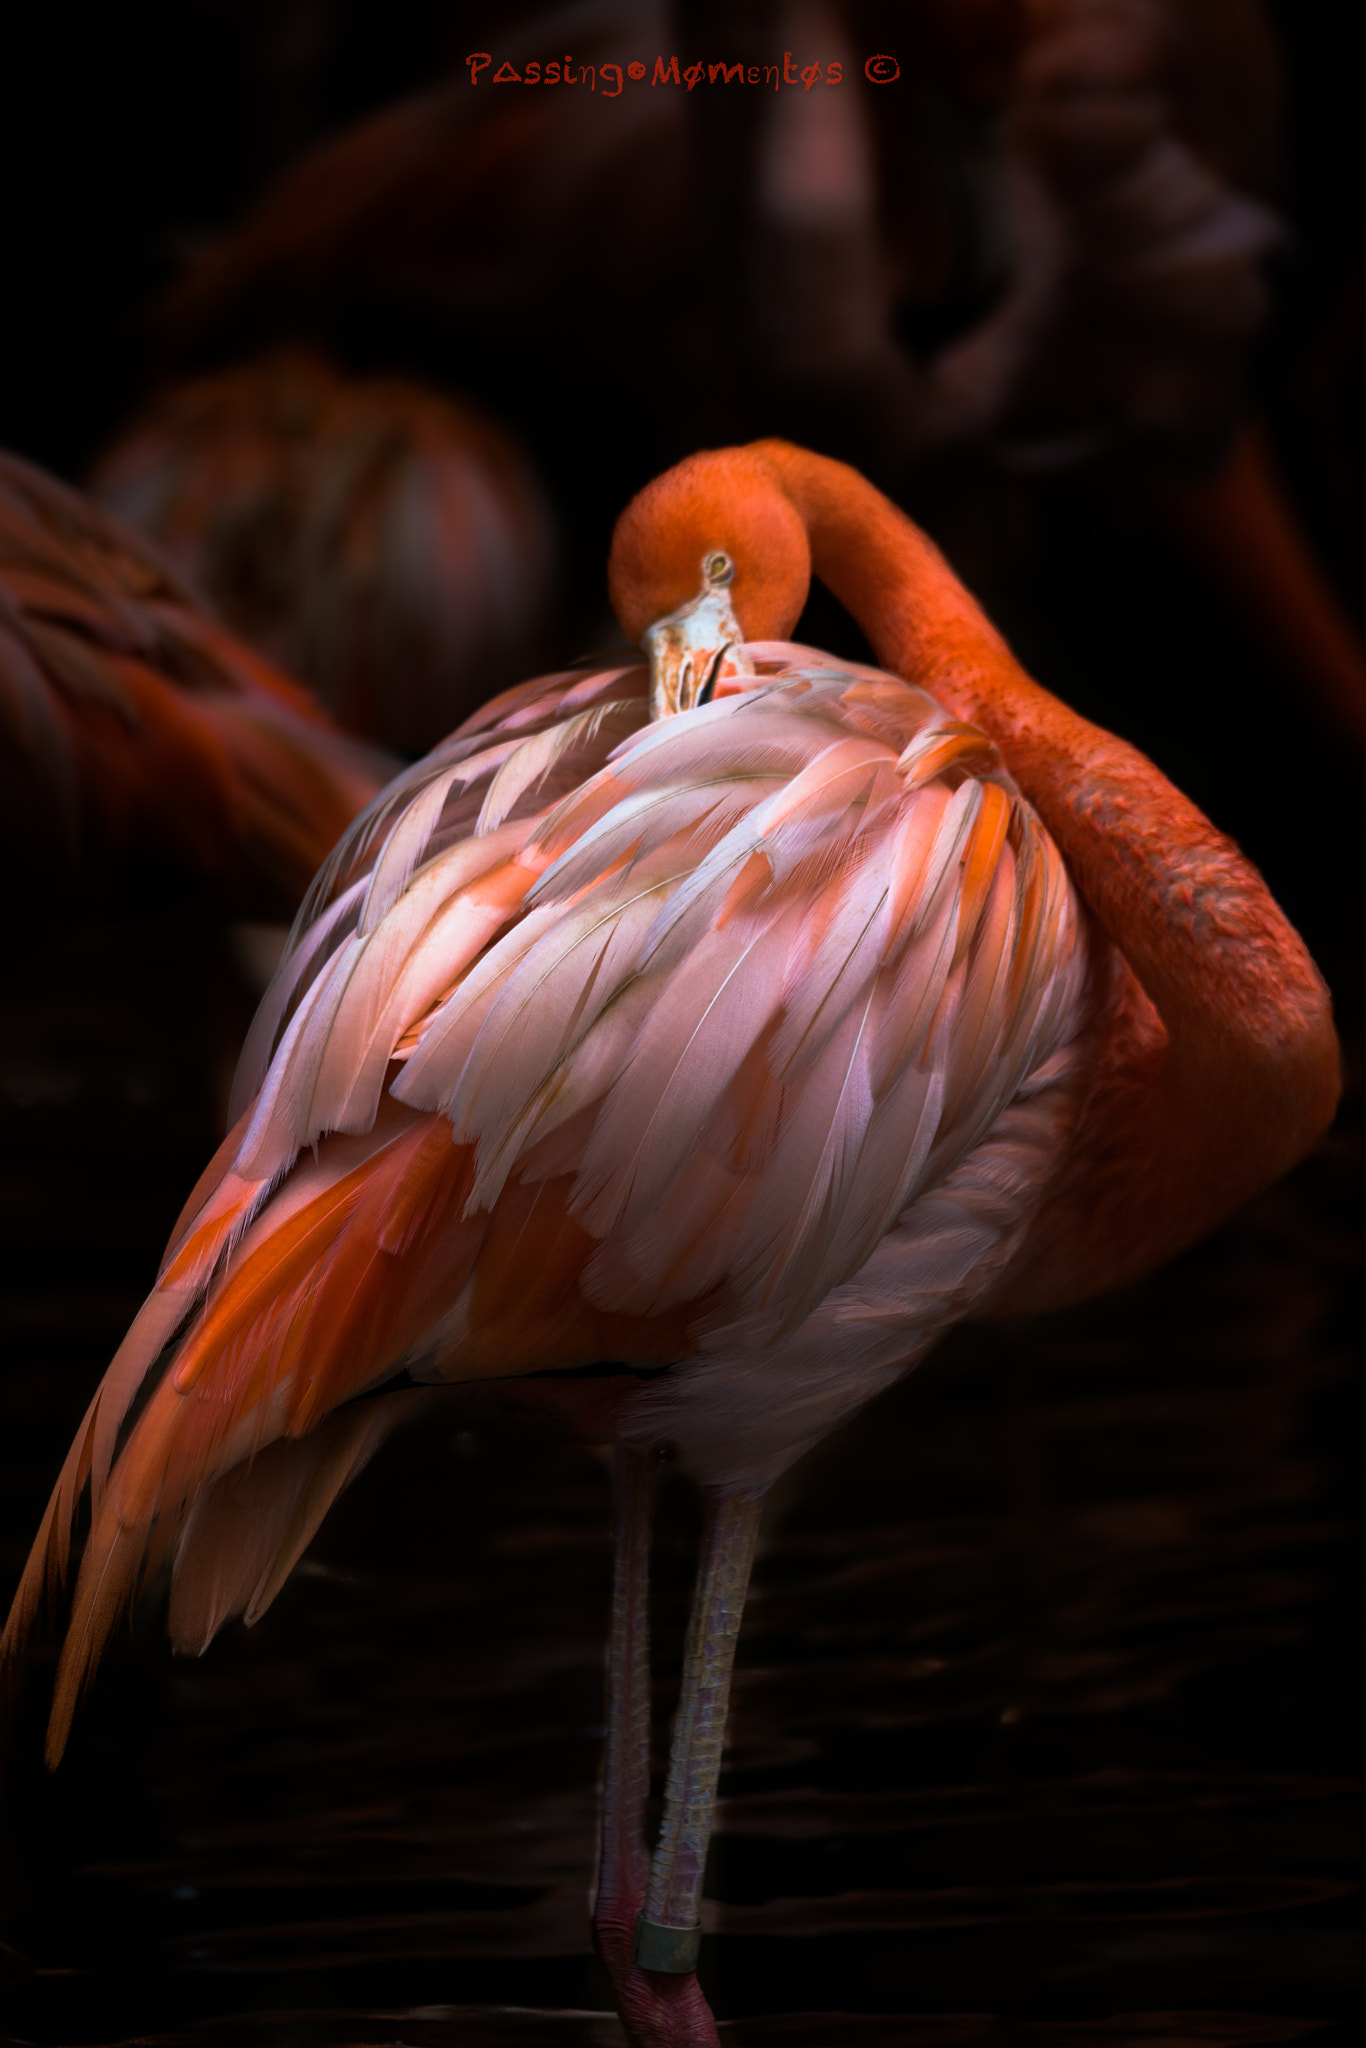 Sony a7R II + 150-600mm F5-6.3 DG OS HSM | Sports 014 sample photo. Flamingo at the park photography